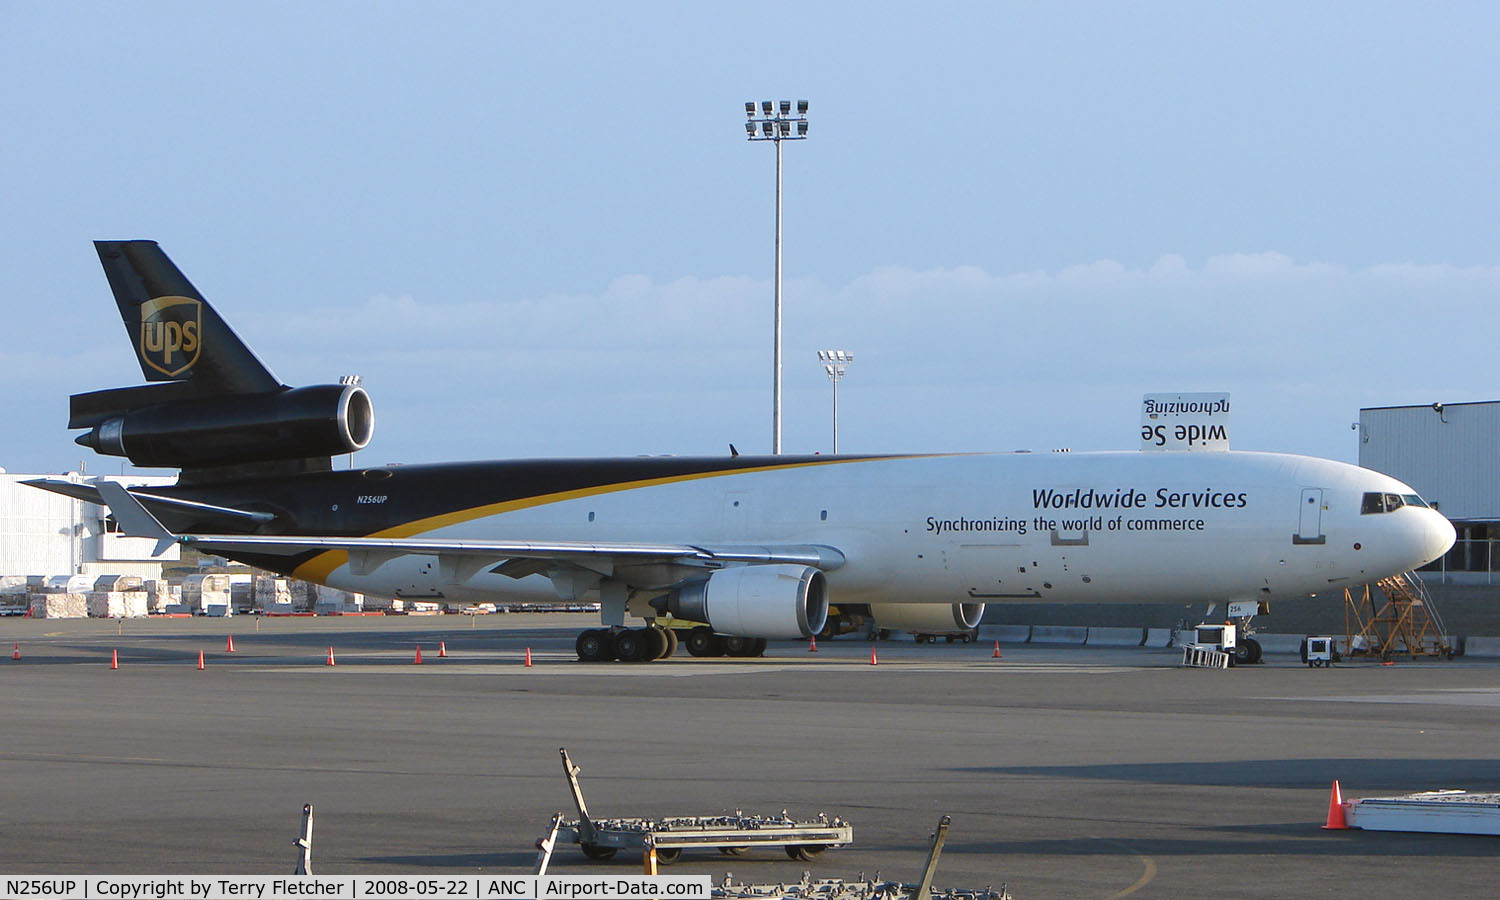 N256UP, 1992 McDonnell Douglas MD-11F C/N 48405, UPS MD11 at Anchorage